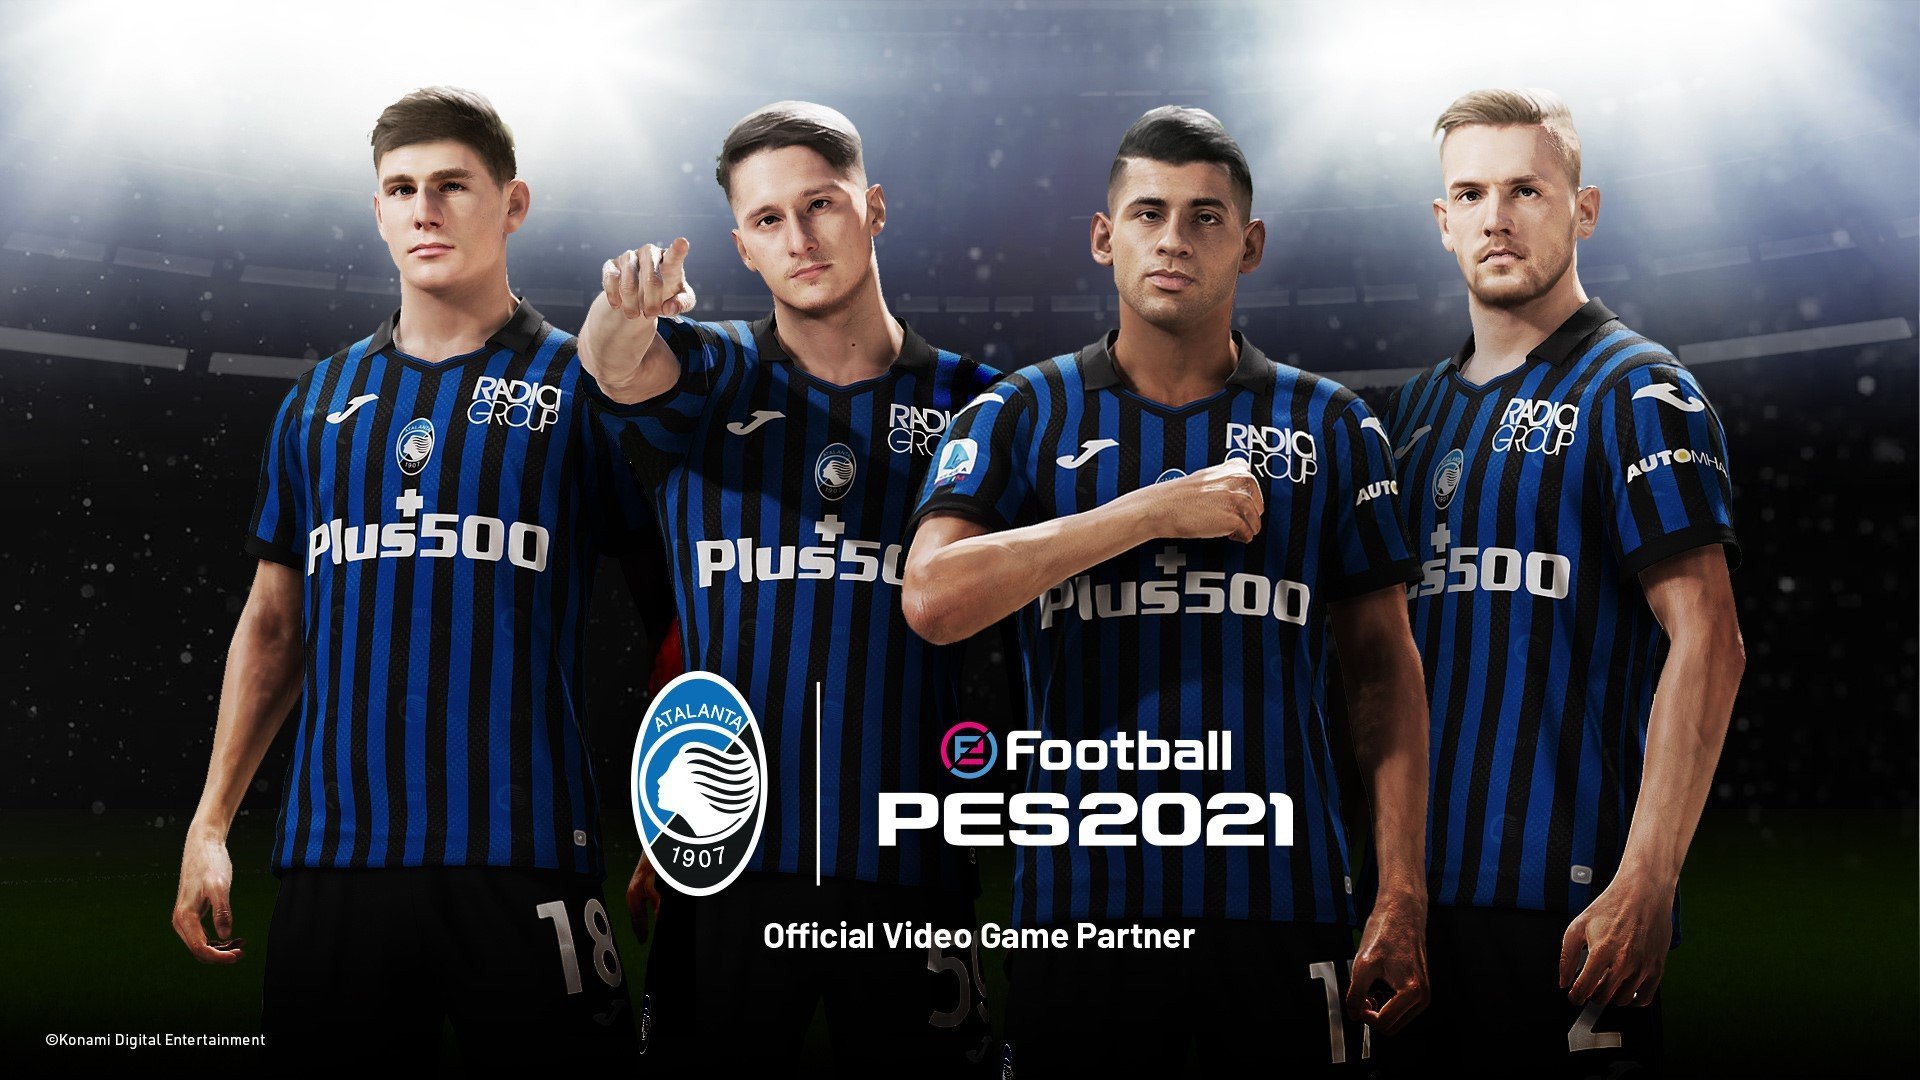 Atalanta Signed by Pro Evolution Soccer, FIFA 22 Forced into Another Name Change